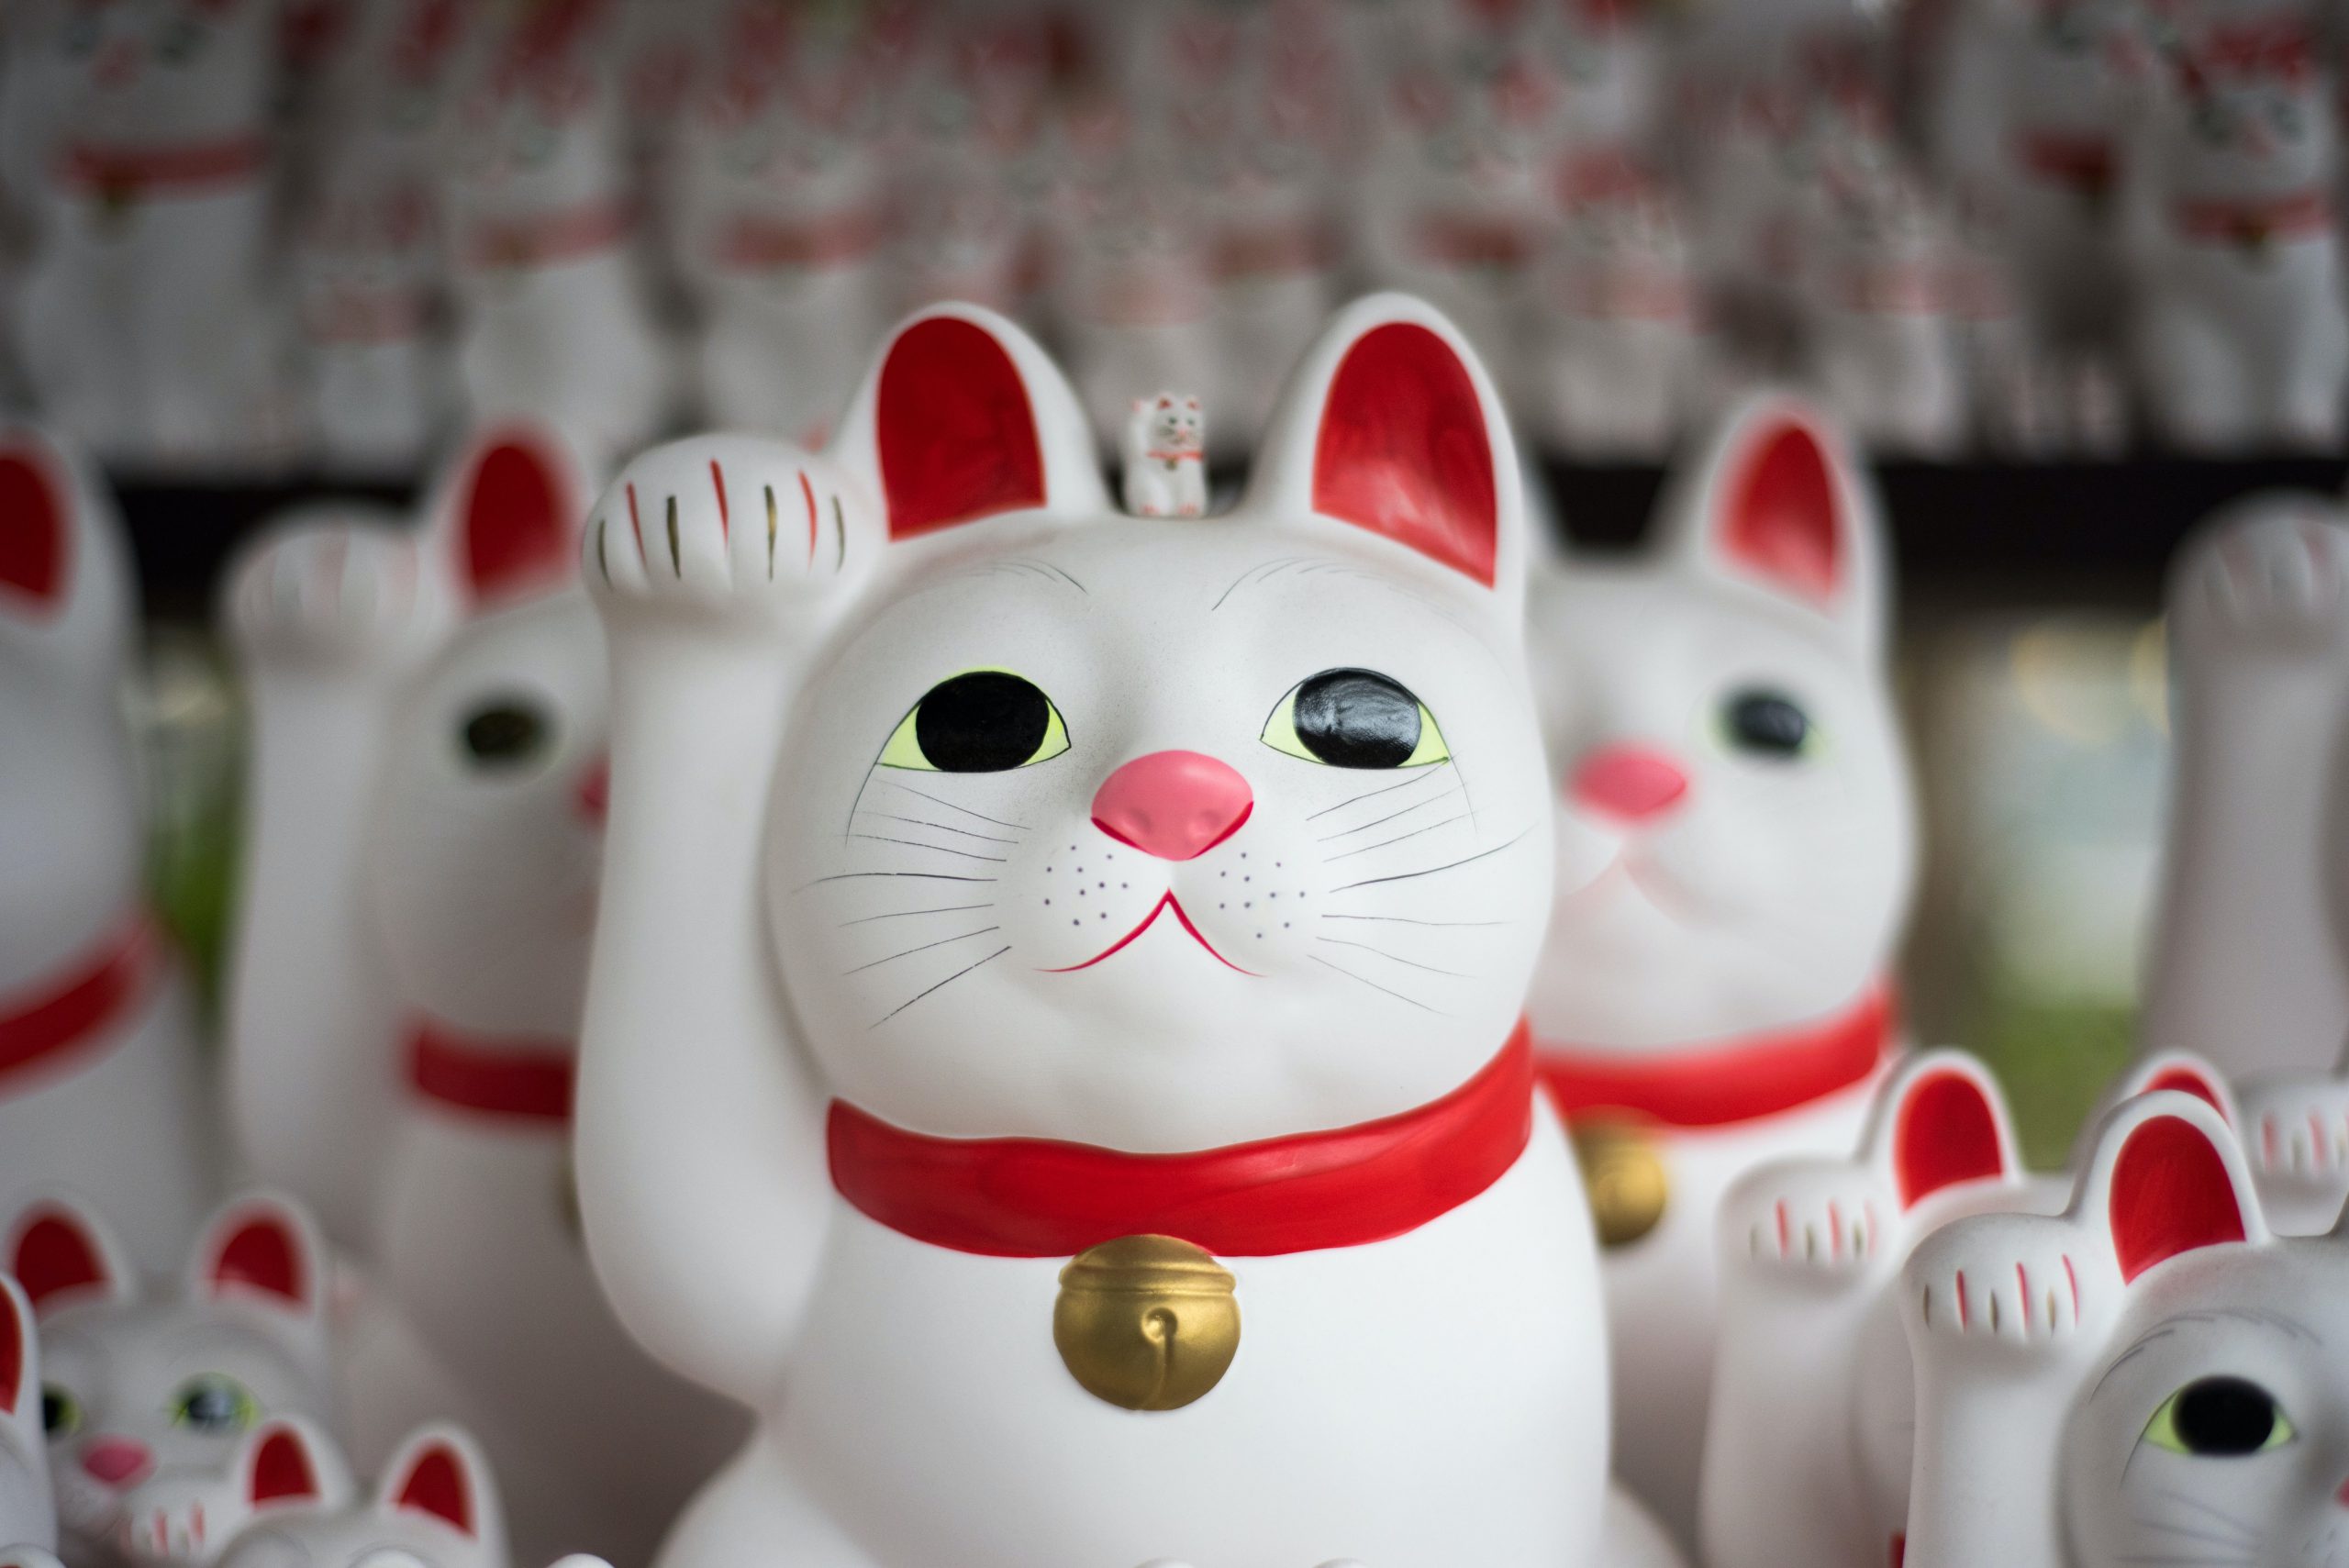 The Worship of Cats in the Echigo Province